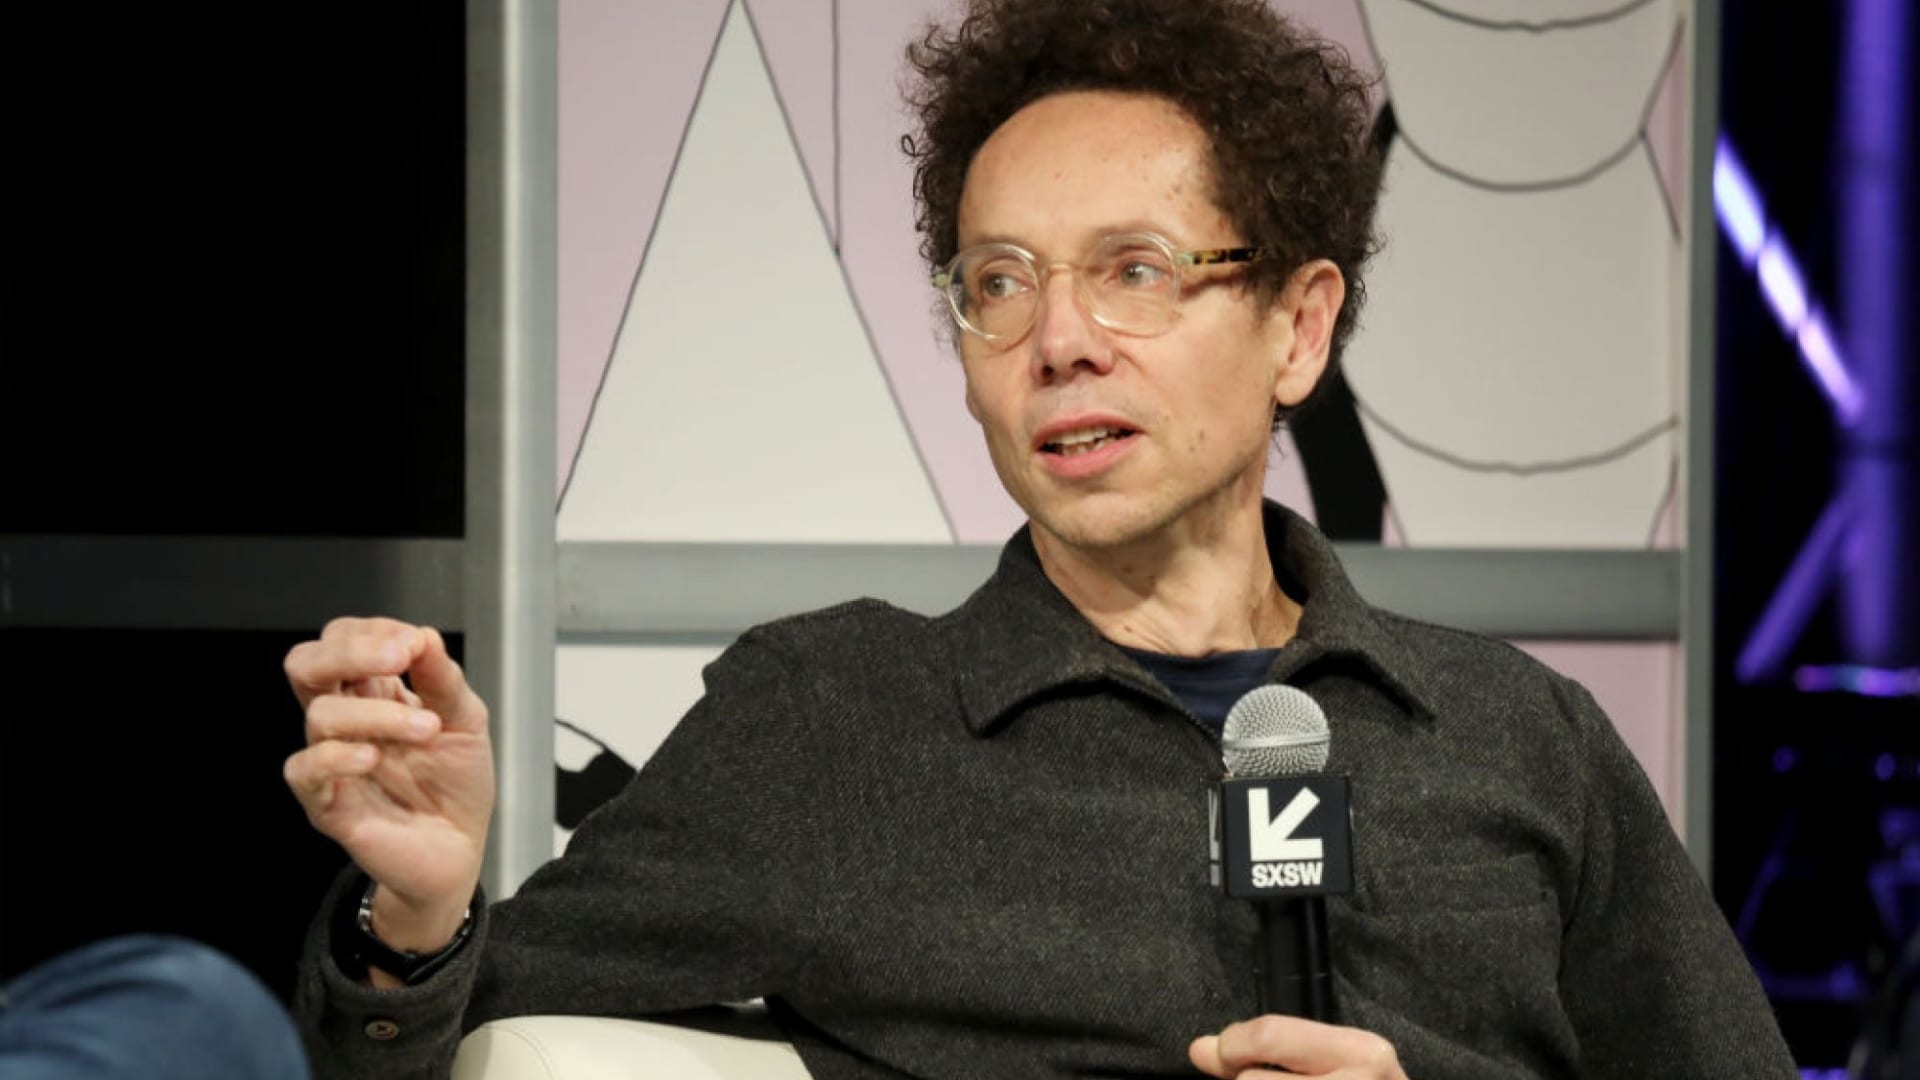 A Look Behind the Brand with Malcolm Gladwell